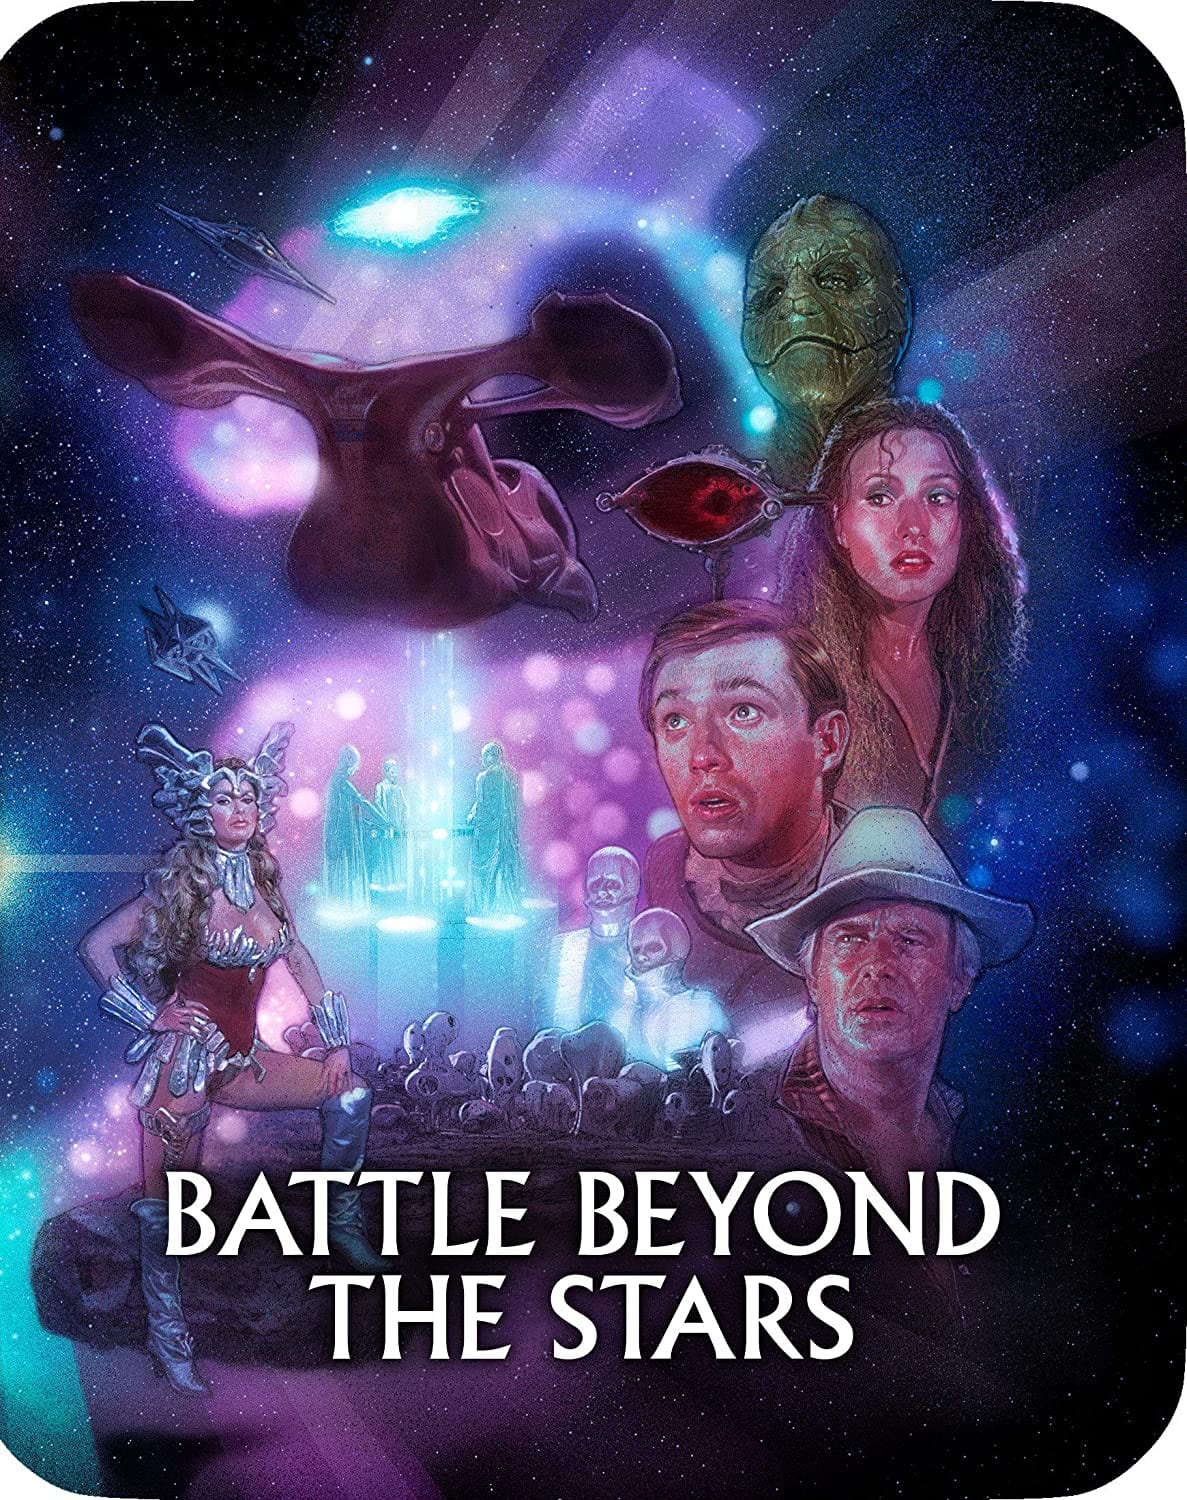 Battle Beyond the Stars Comes to Bluray Steelbook from SHOUT! Factory